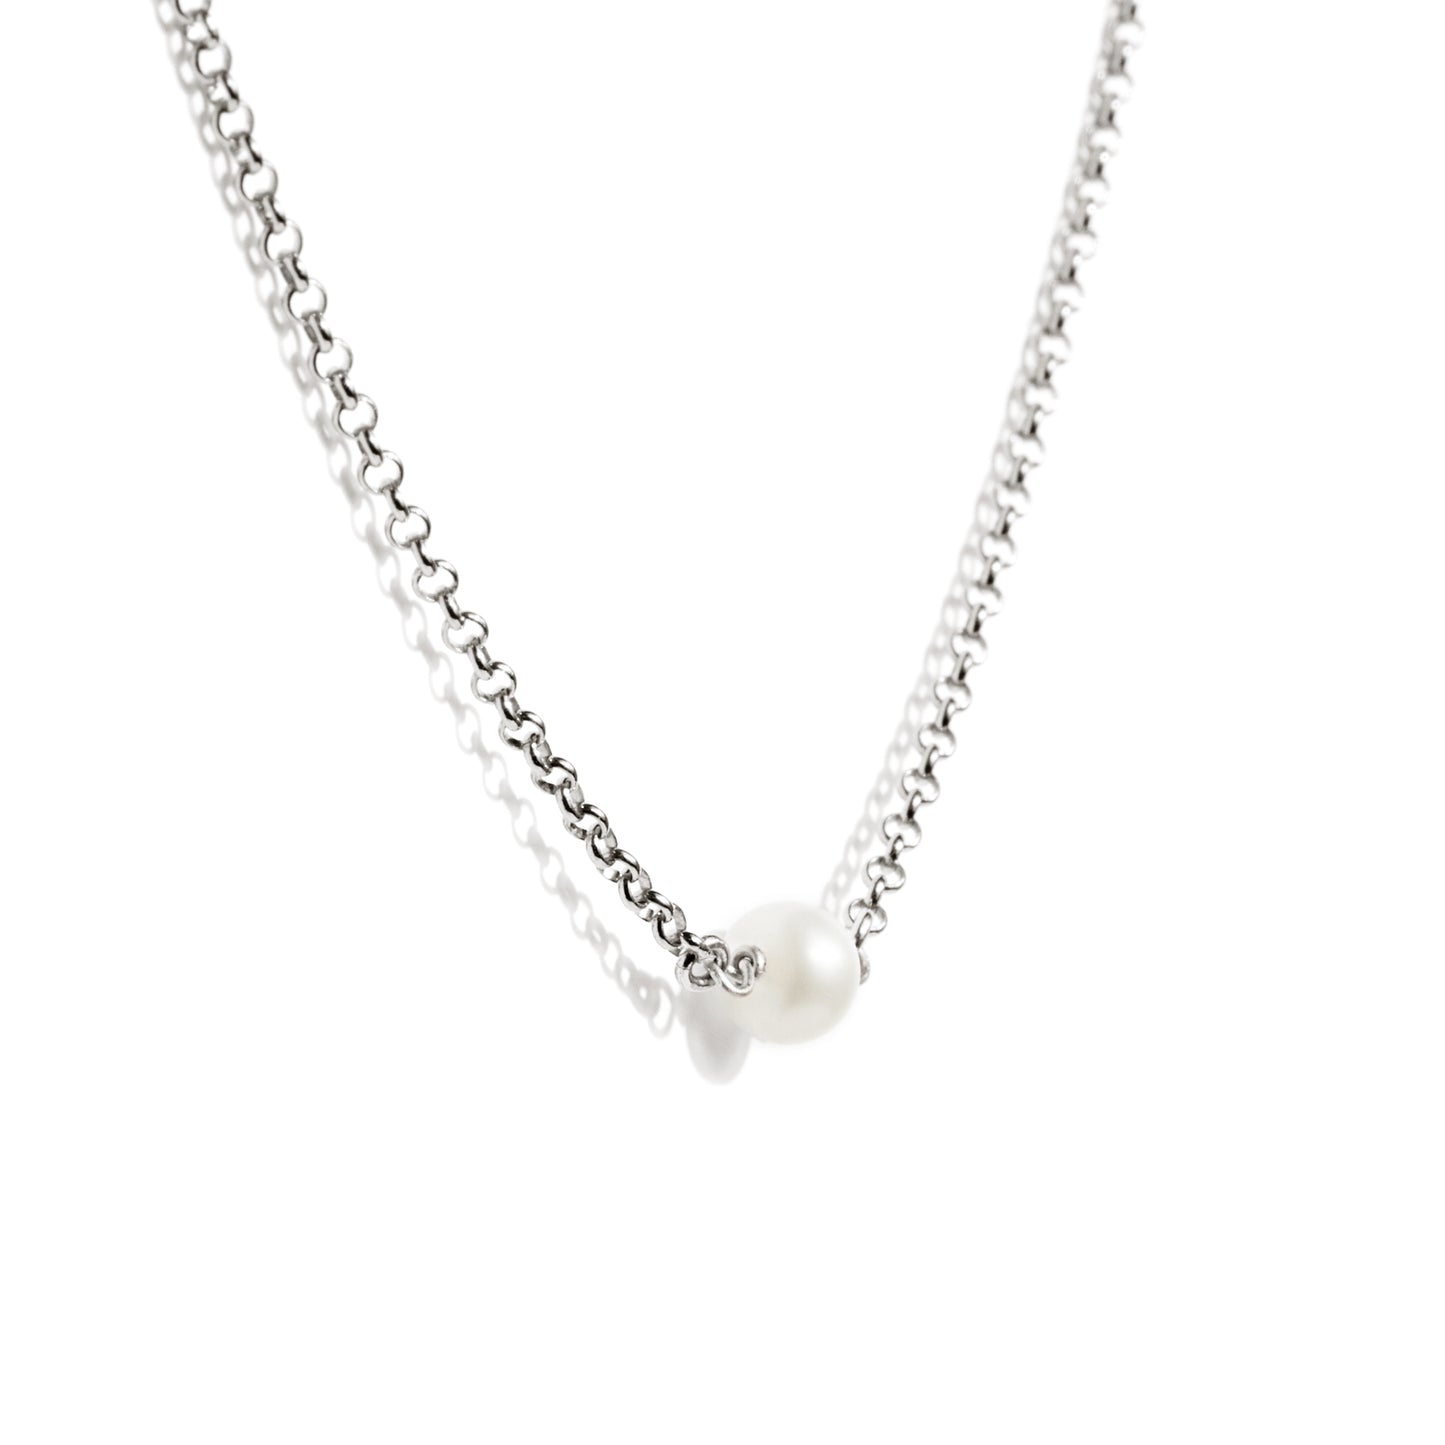 FRESHWATER PEARL NECKLACE IN SILVER